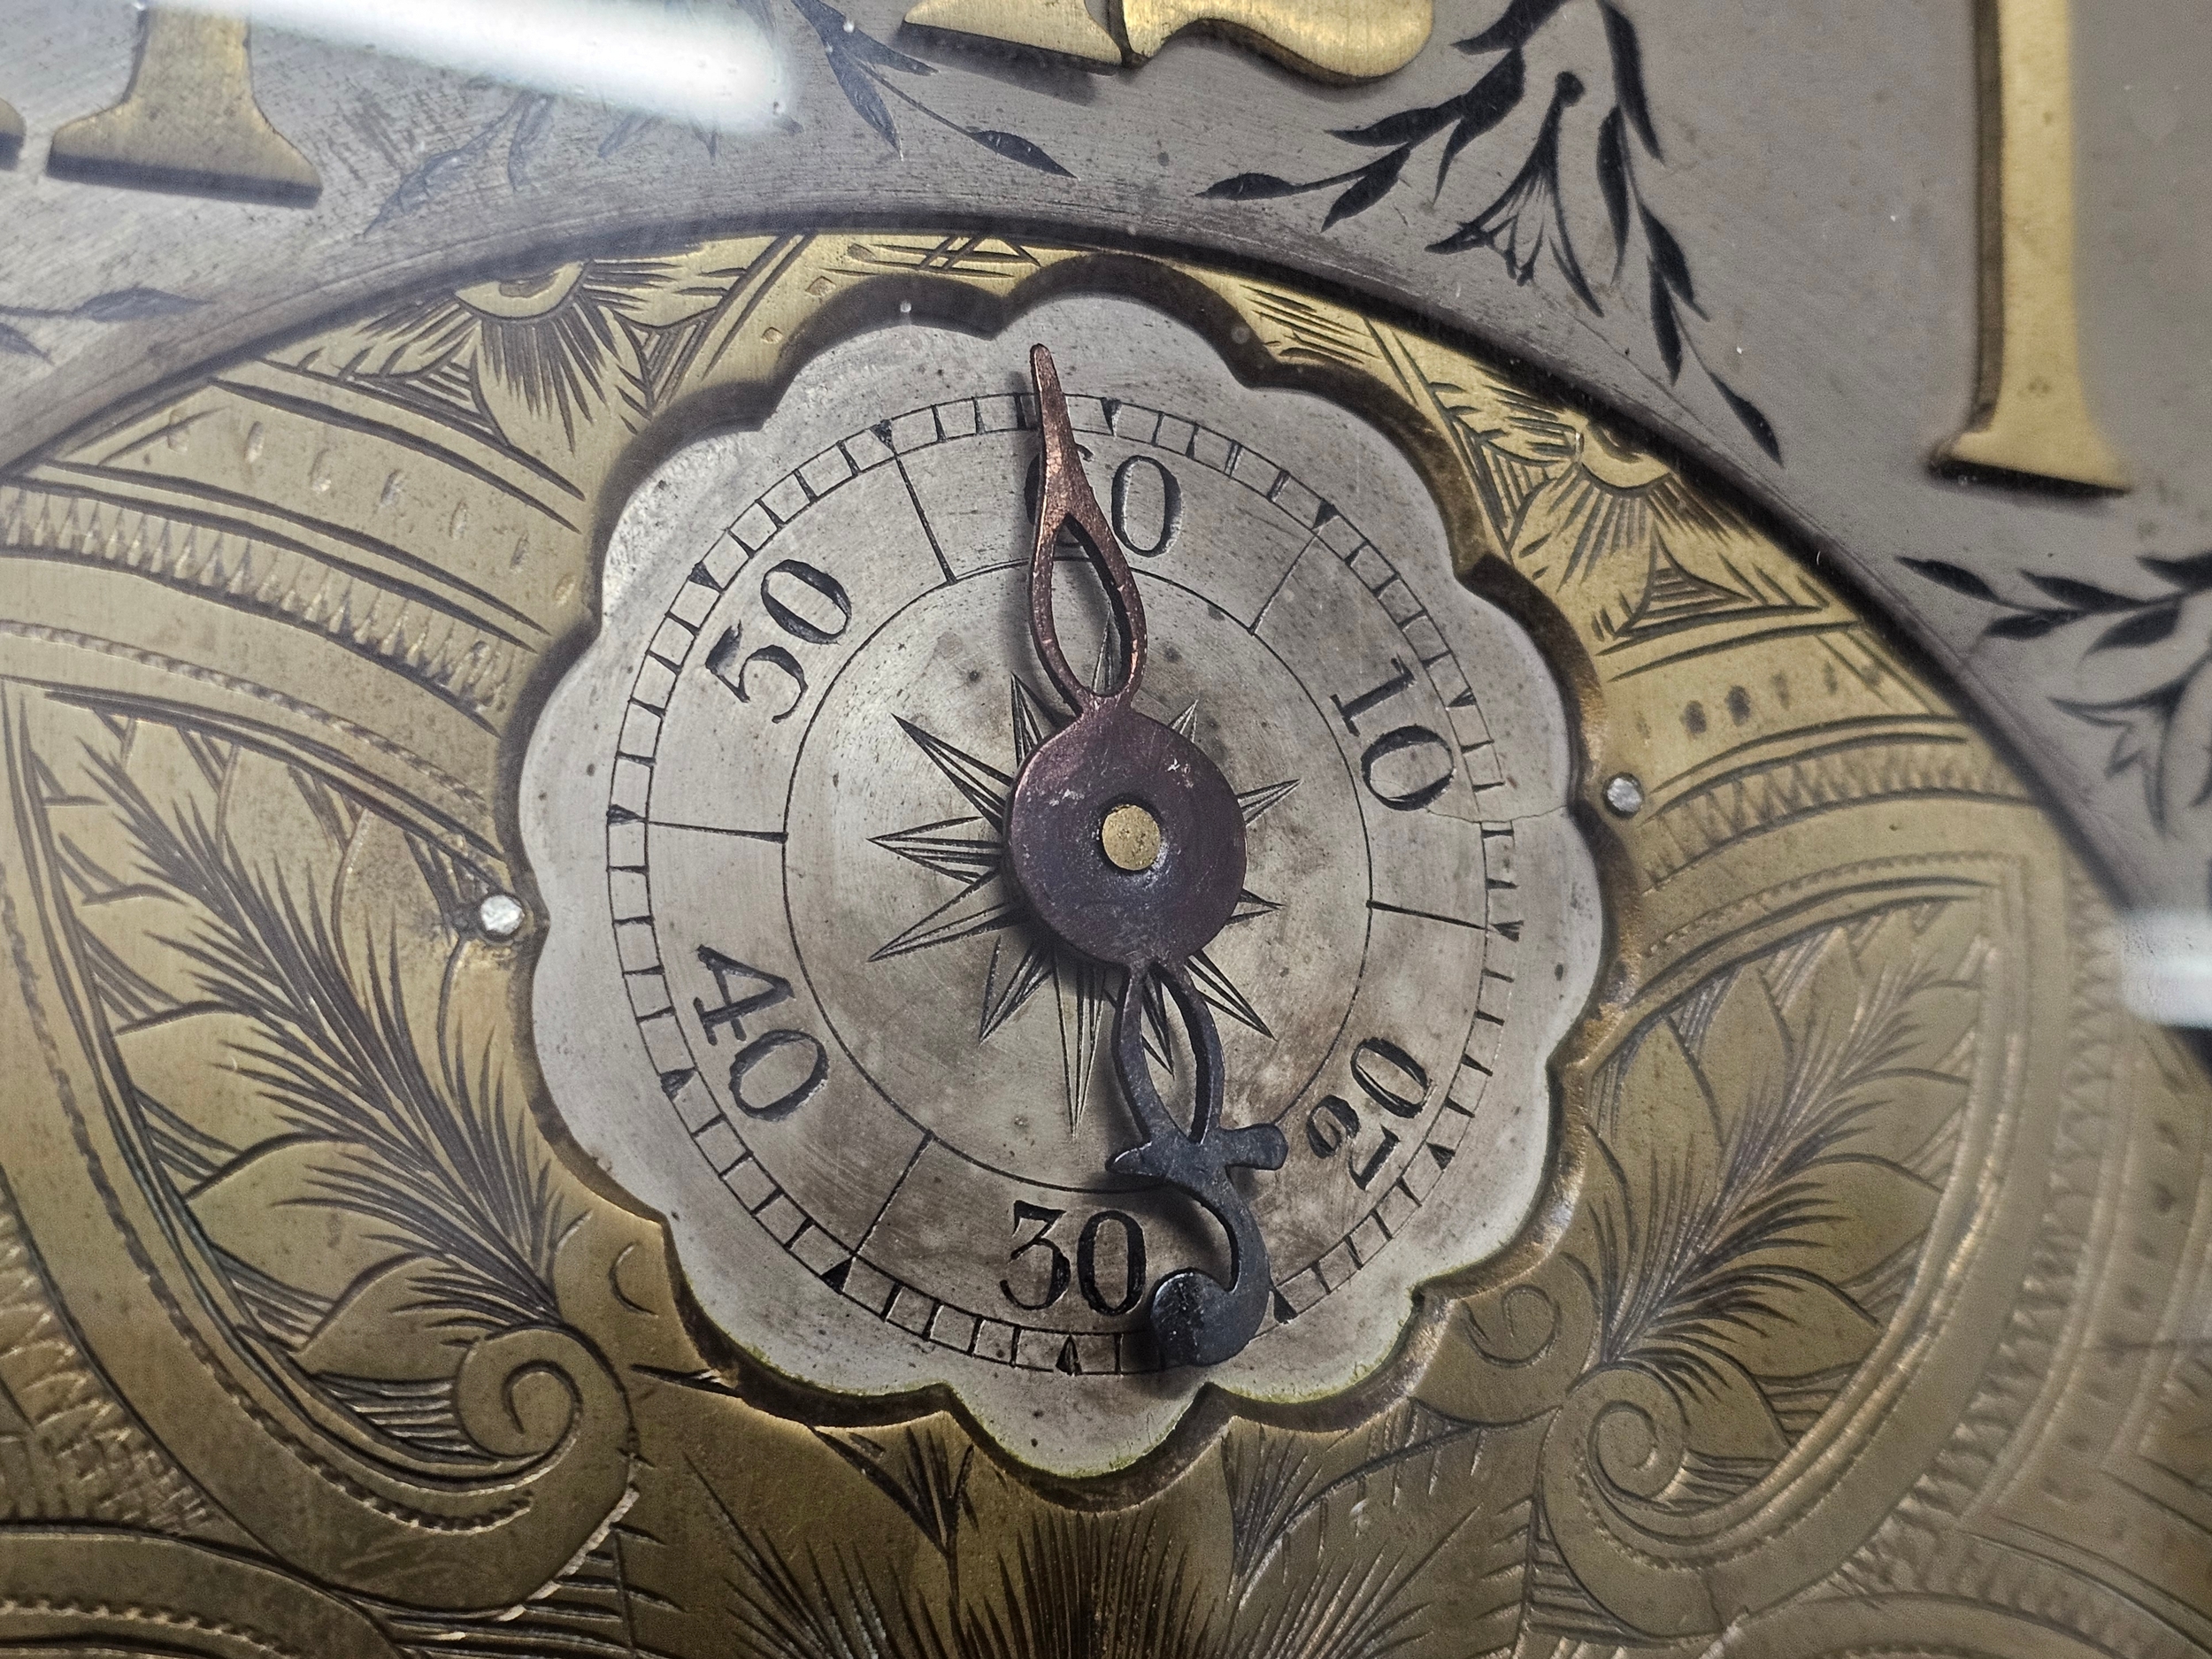 Longcase clock, 19th century mahogany and oak cased with satinwood inlay, etched brass and steel - Image 4 of 6